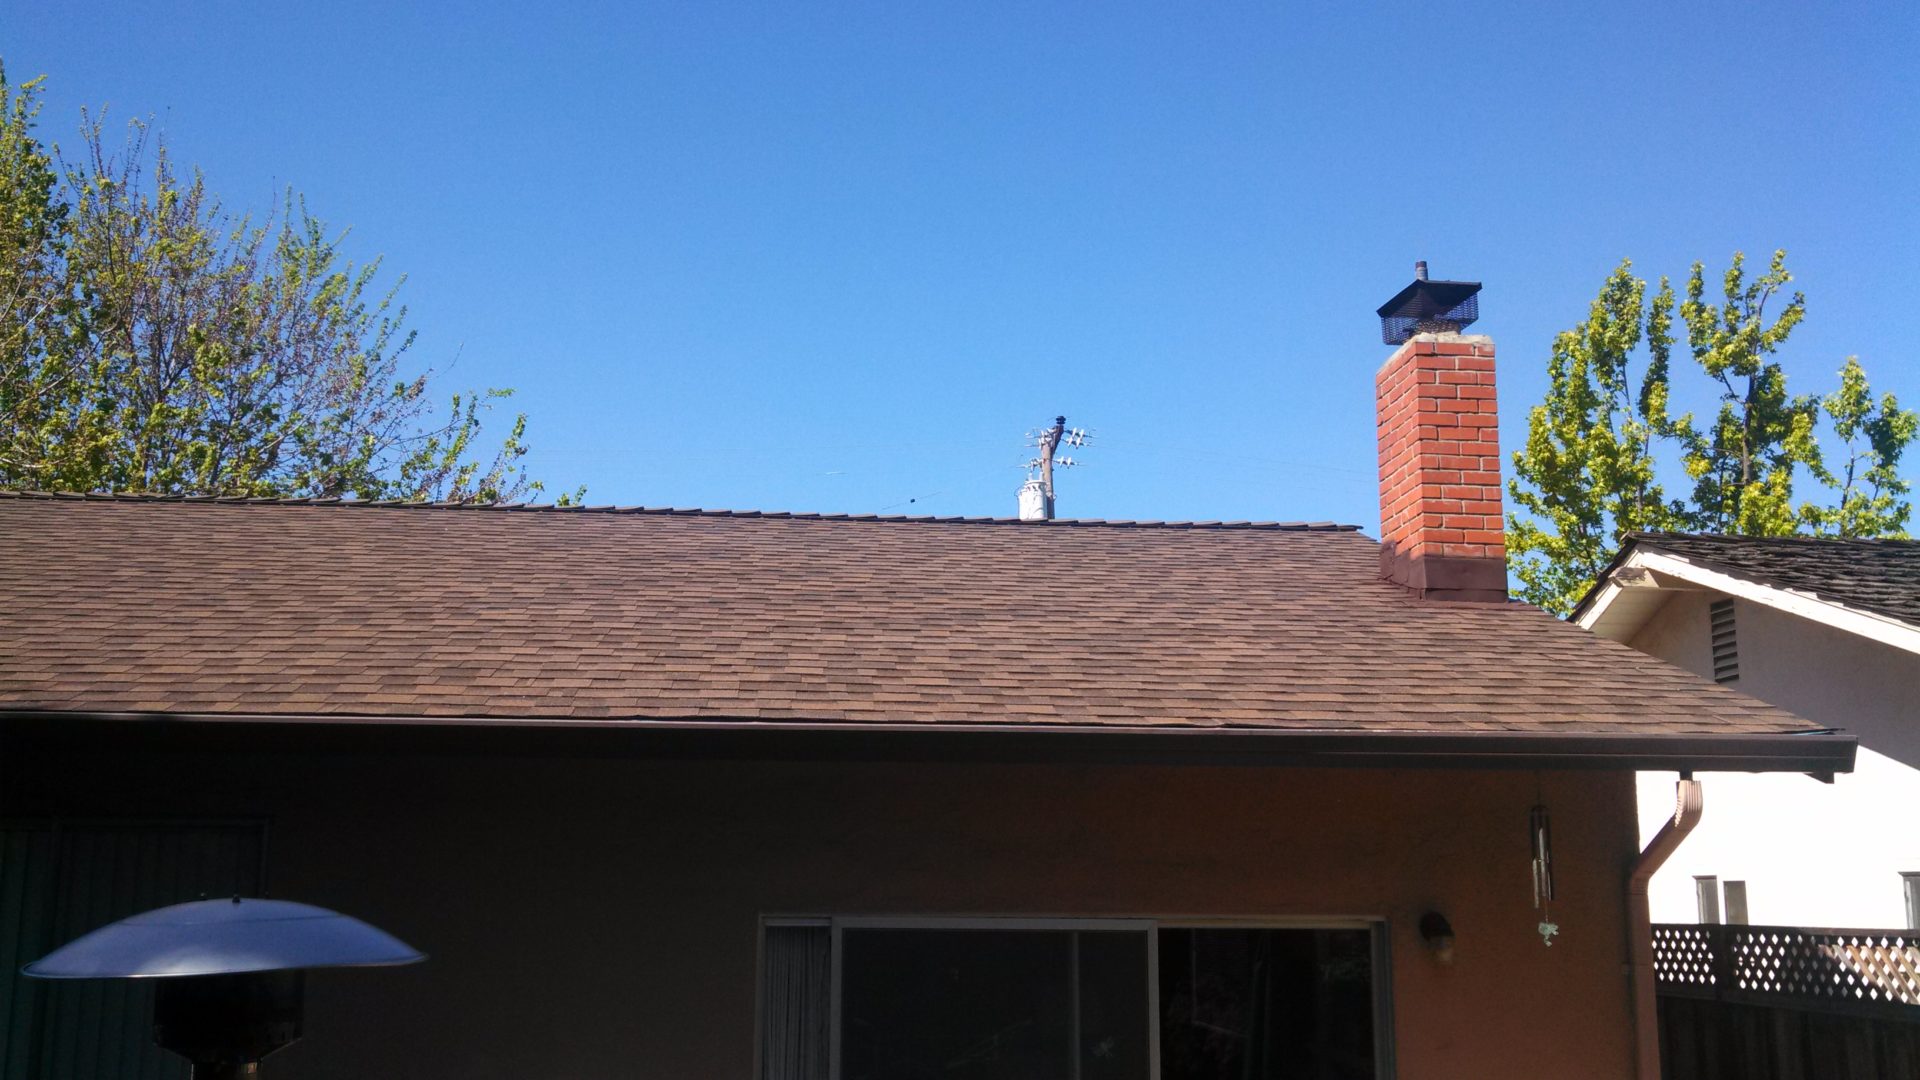 New brown shingle roof installed on a residential home in milpitas, California